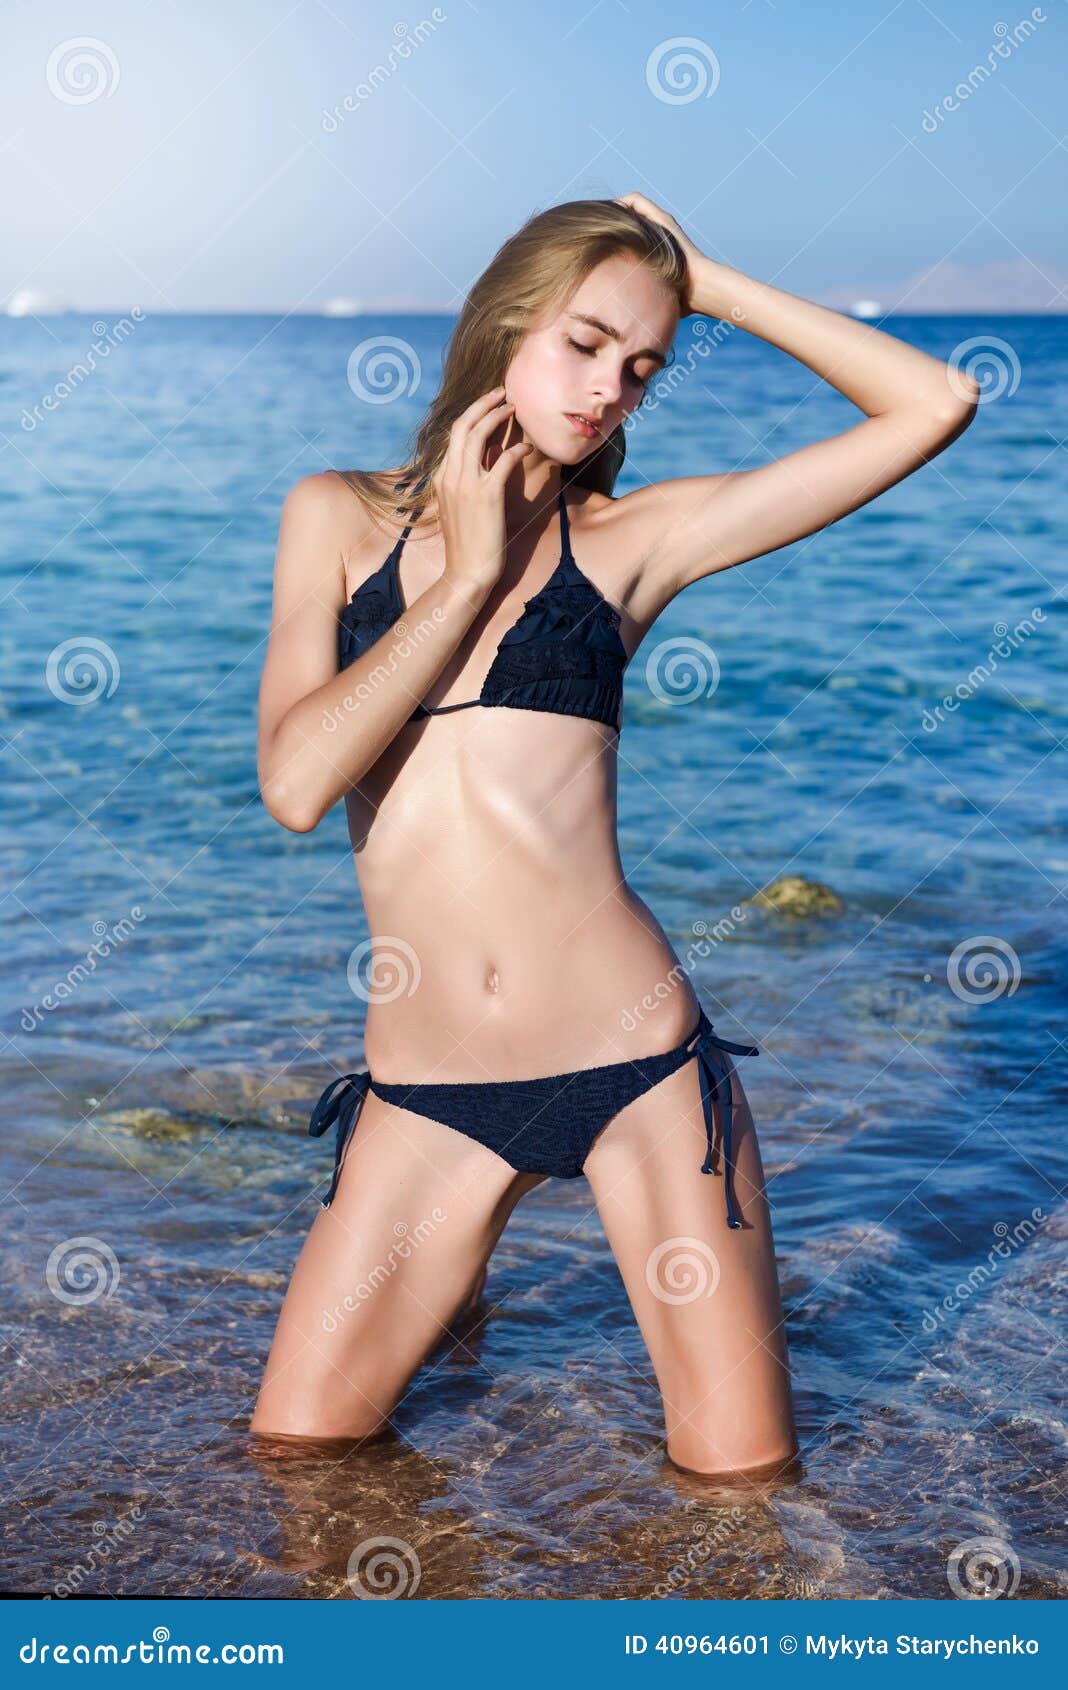 charles p miller recommends perfect teen bikini body pic